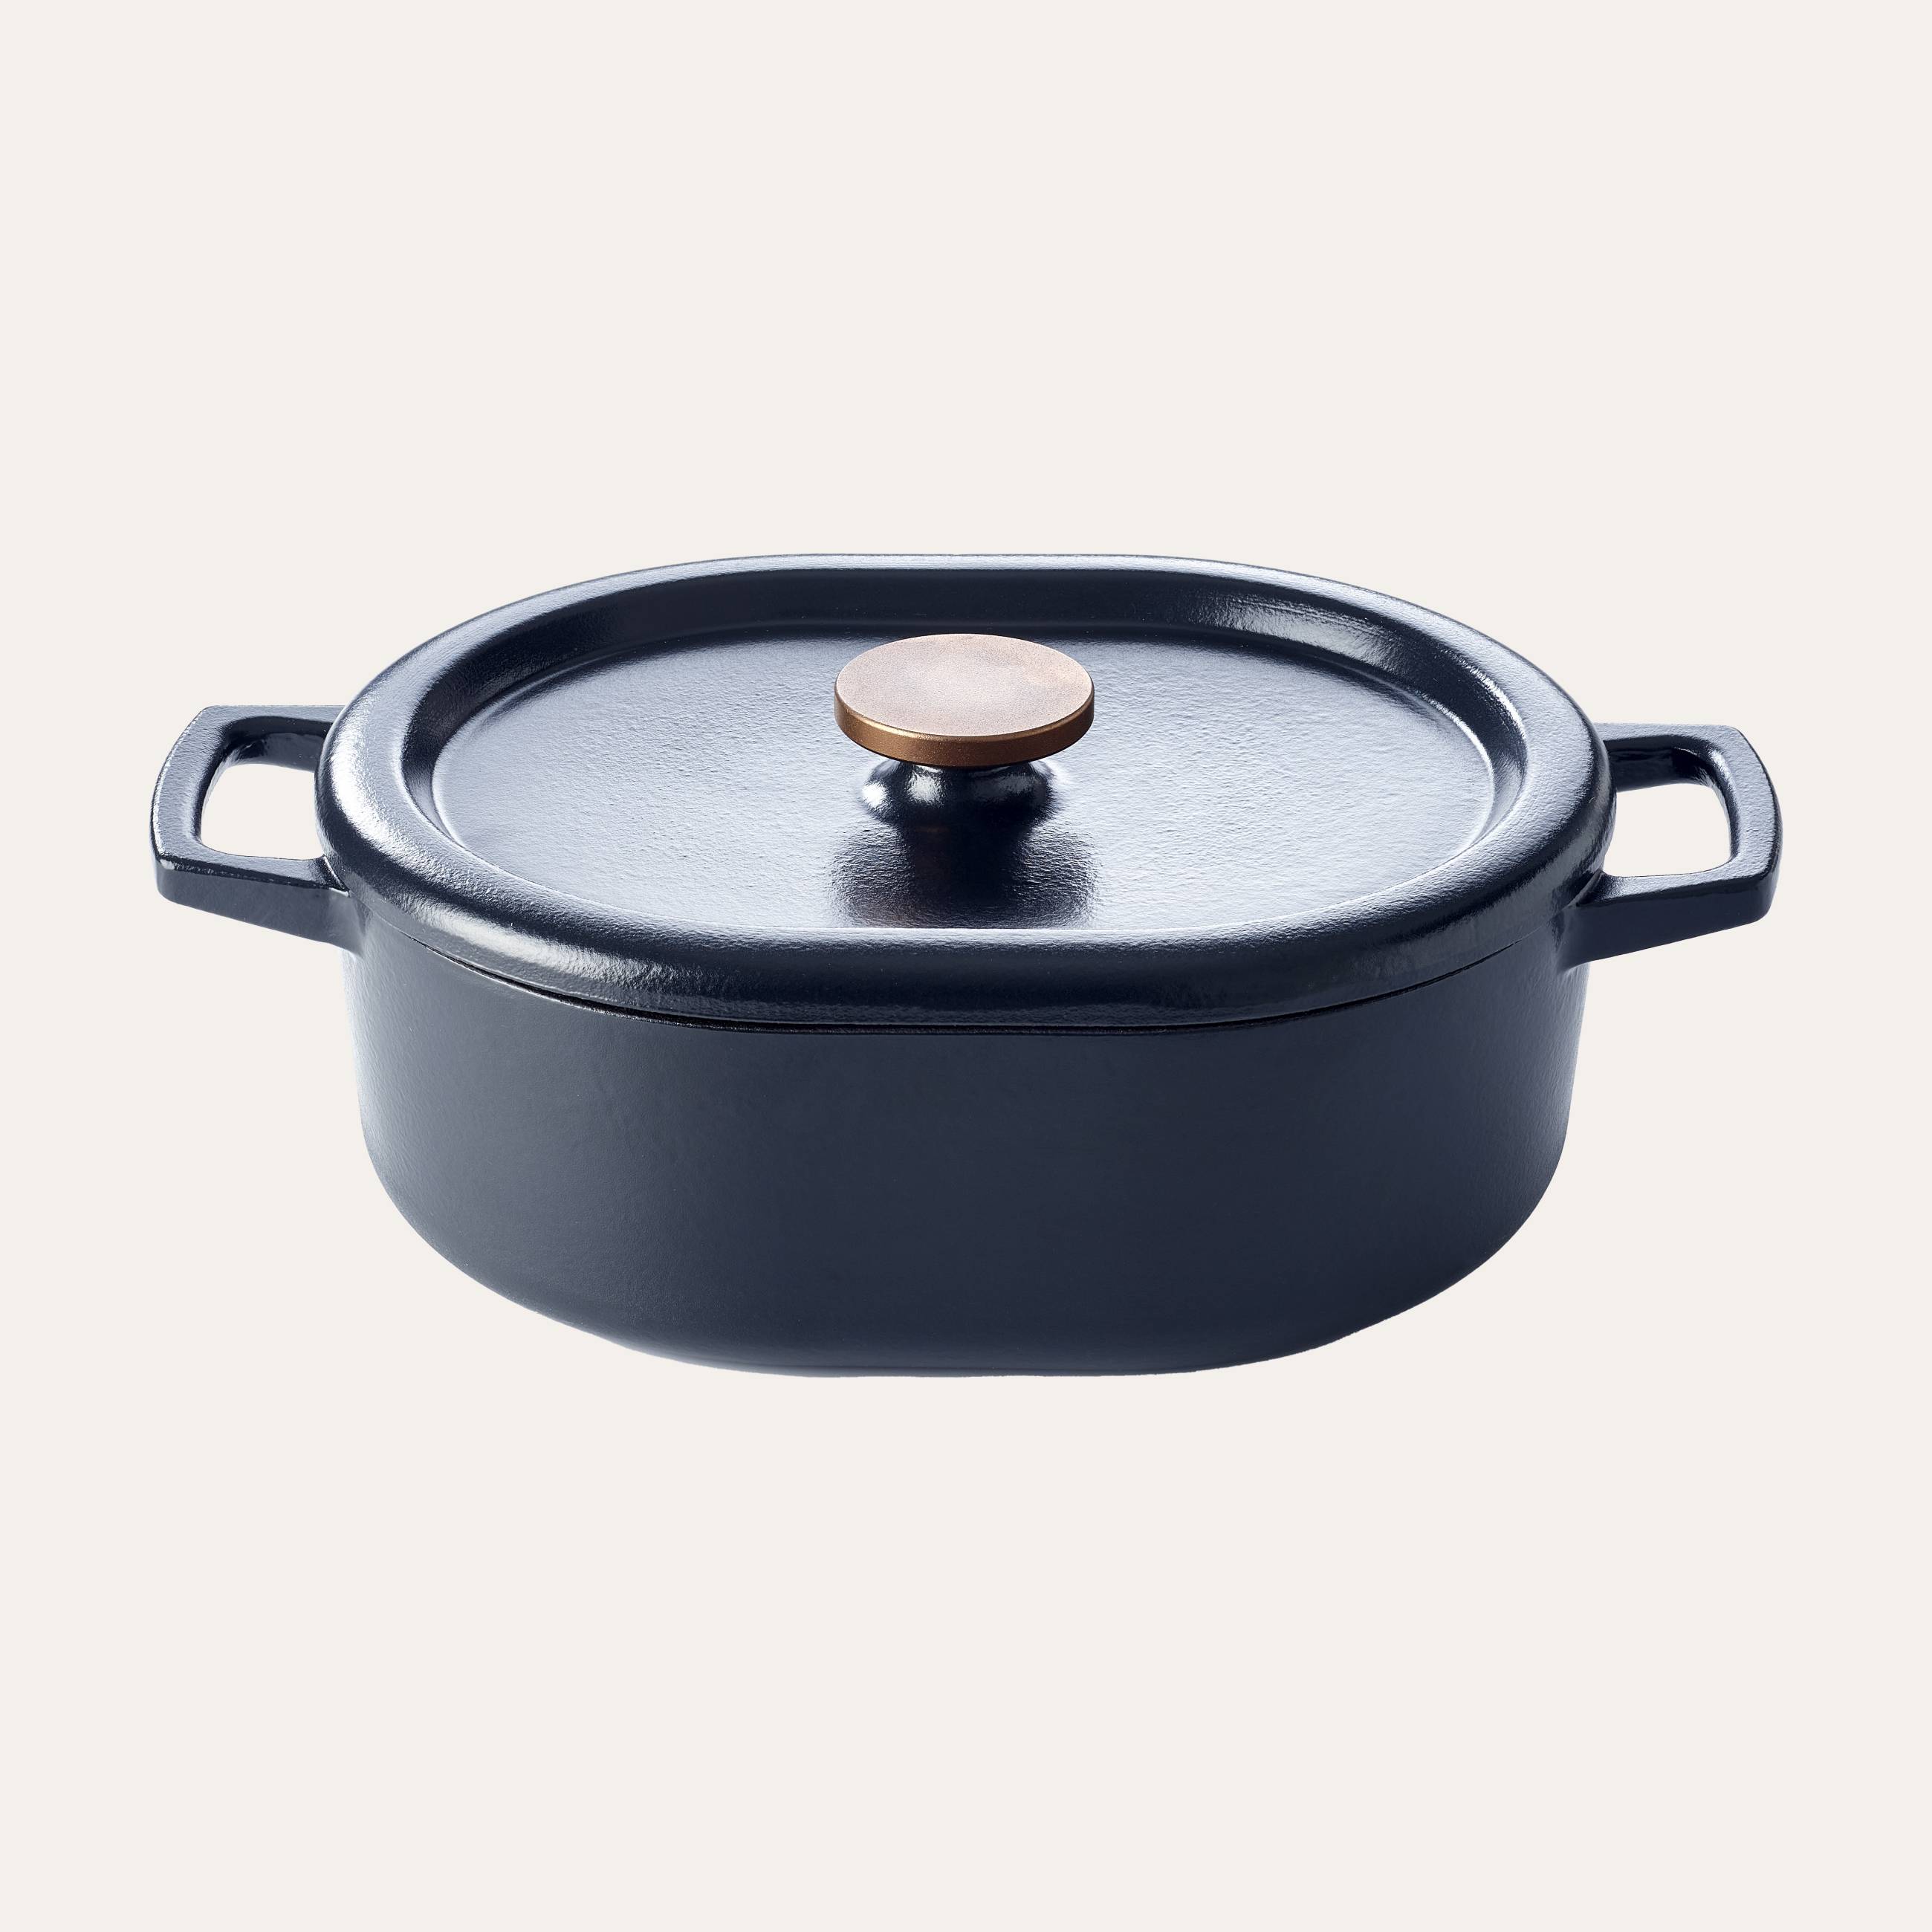 Oval Enameled Cast Iron Dutch Oven